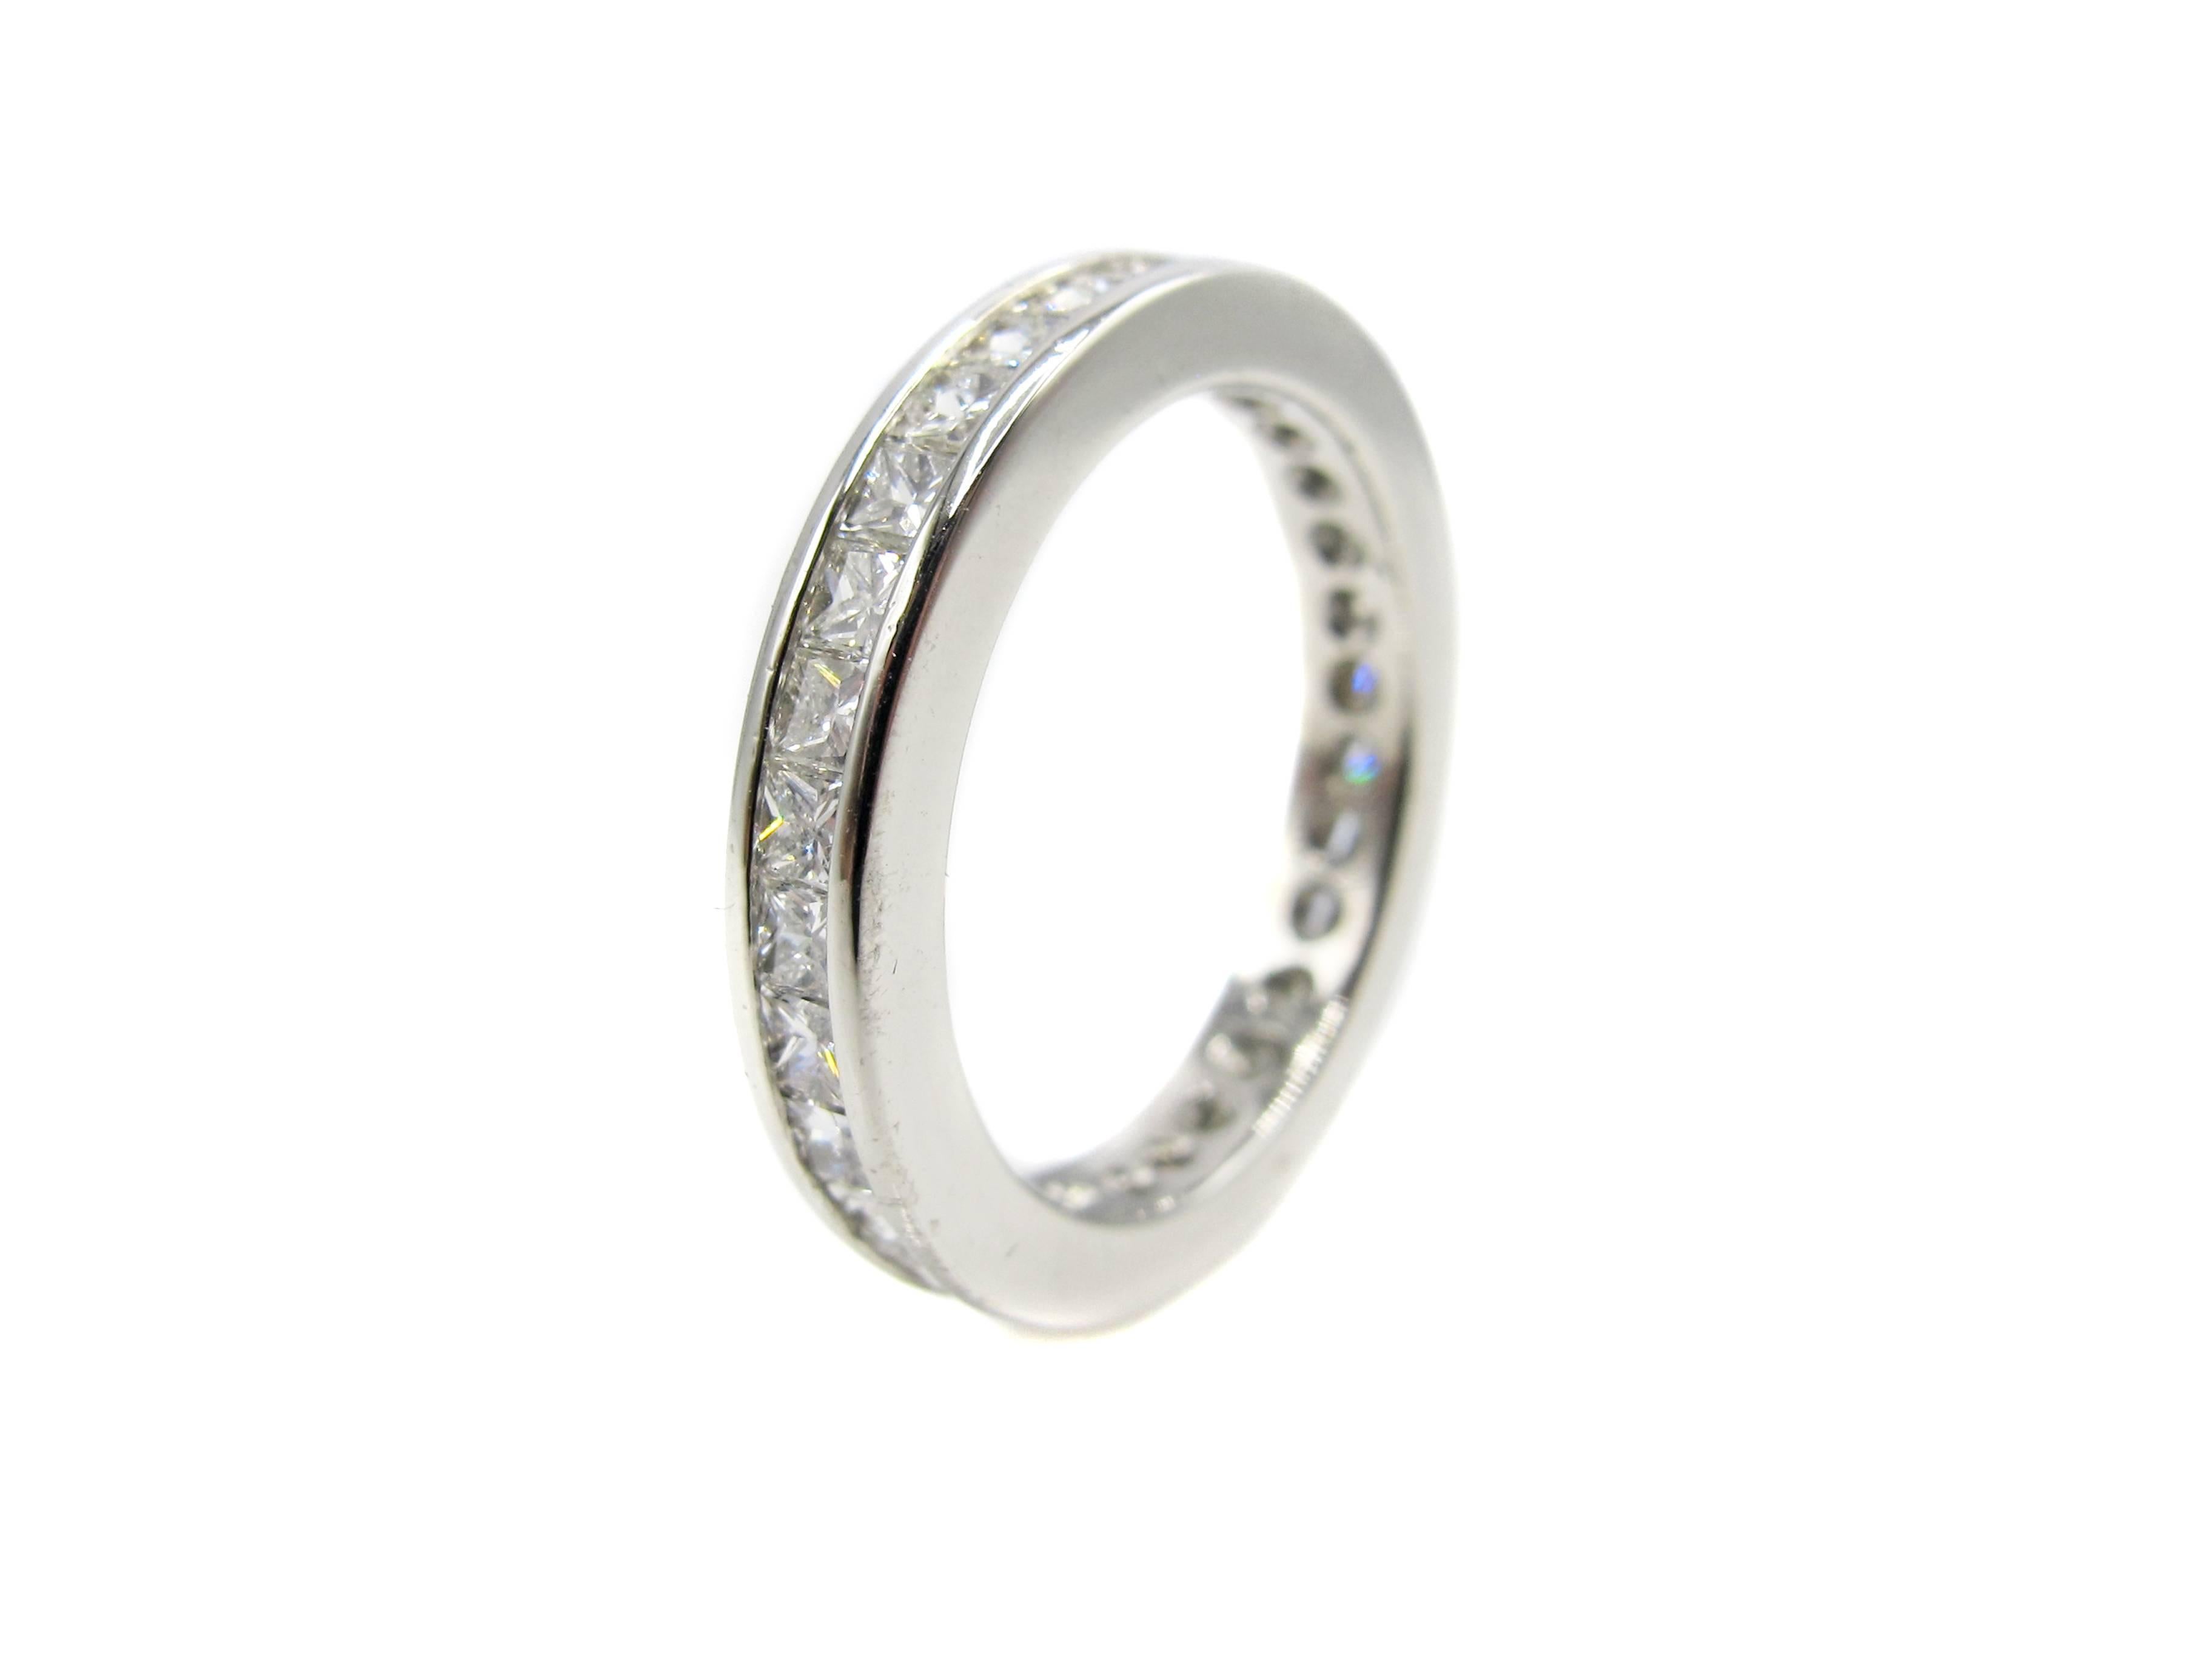 
Finely handcrafted platinum eternity band set with 32 perfectly matched bright white and sparkly princess cut diamonds. The diamonds are bezel set precisely next to each other with no spaces showing, giving the appearance of flowing river of white.